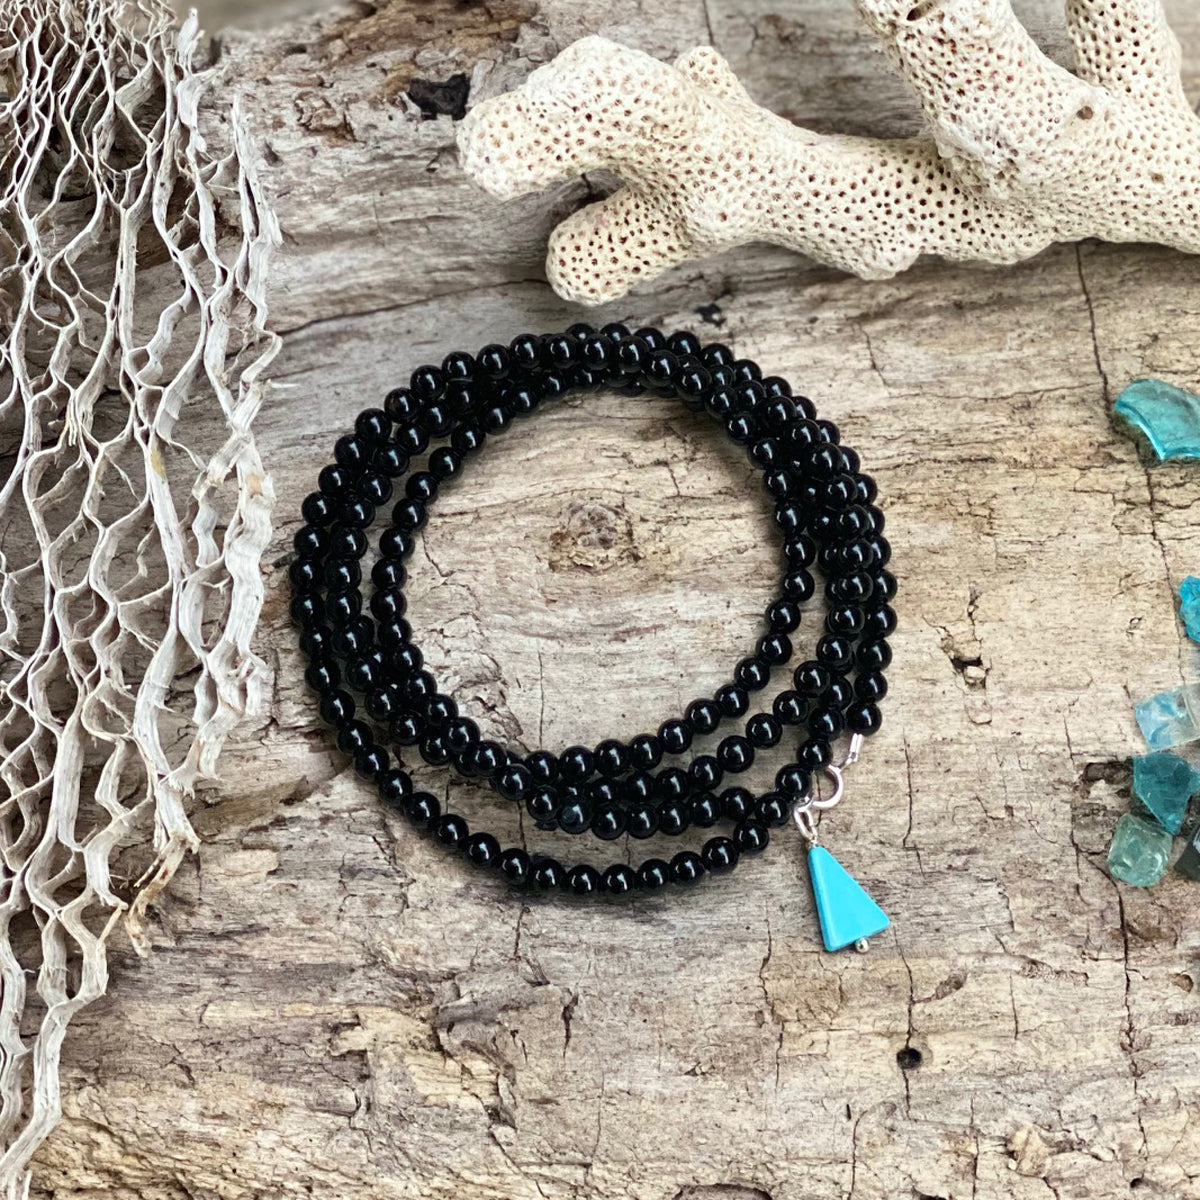 Black Onyx Wrap Bracelet for Self-Control with a Turquoise Dangle Charm